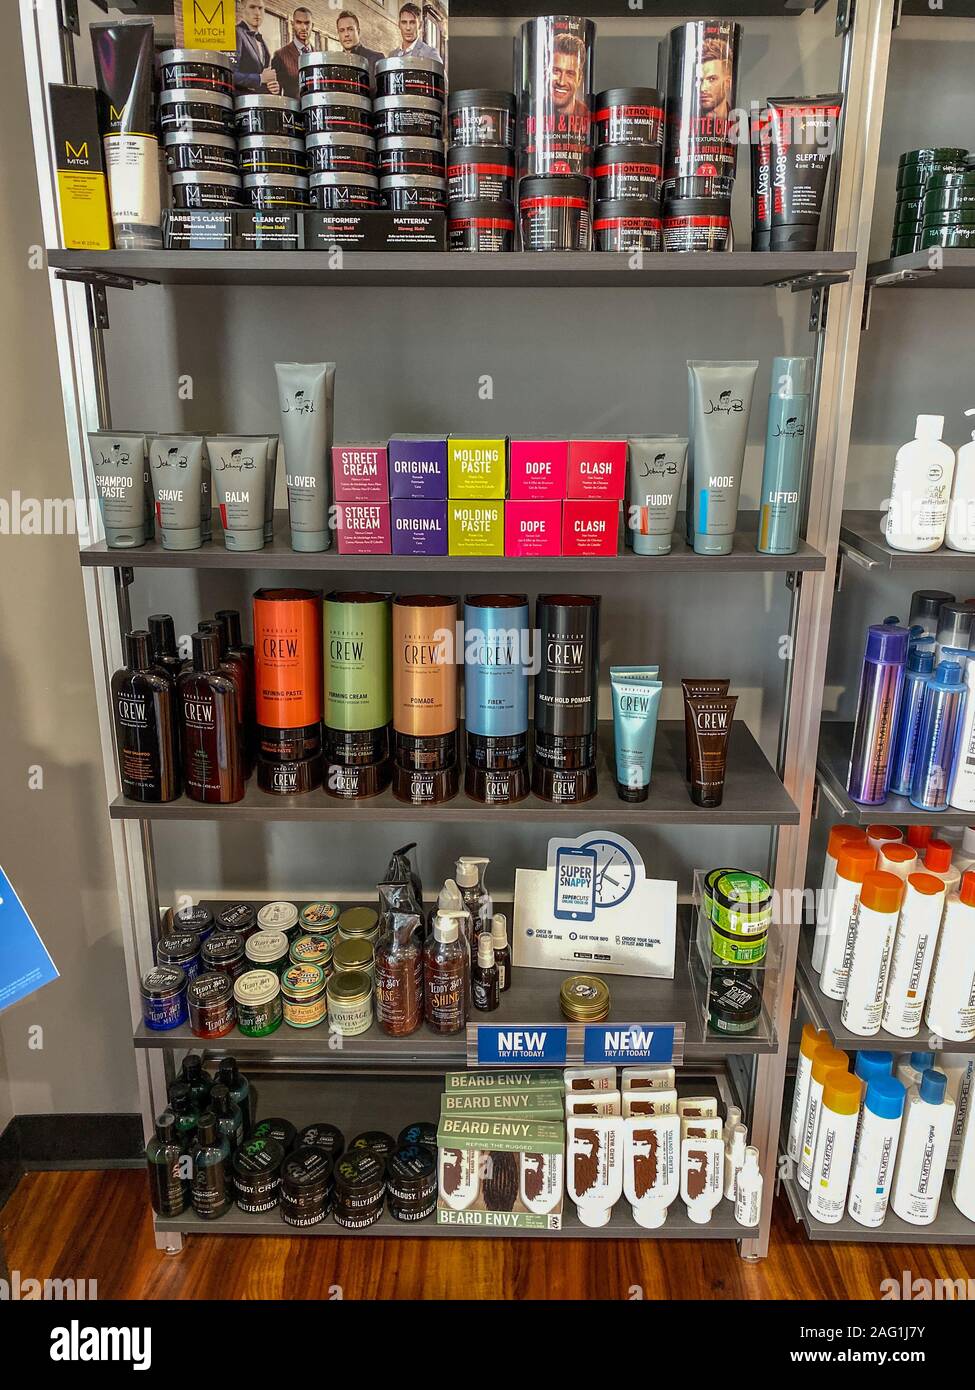 Supercuts hair products products -Fotos und -Bildmaterial in hoher  Auflösung – Alamy